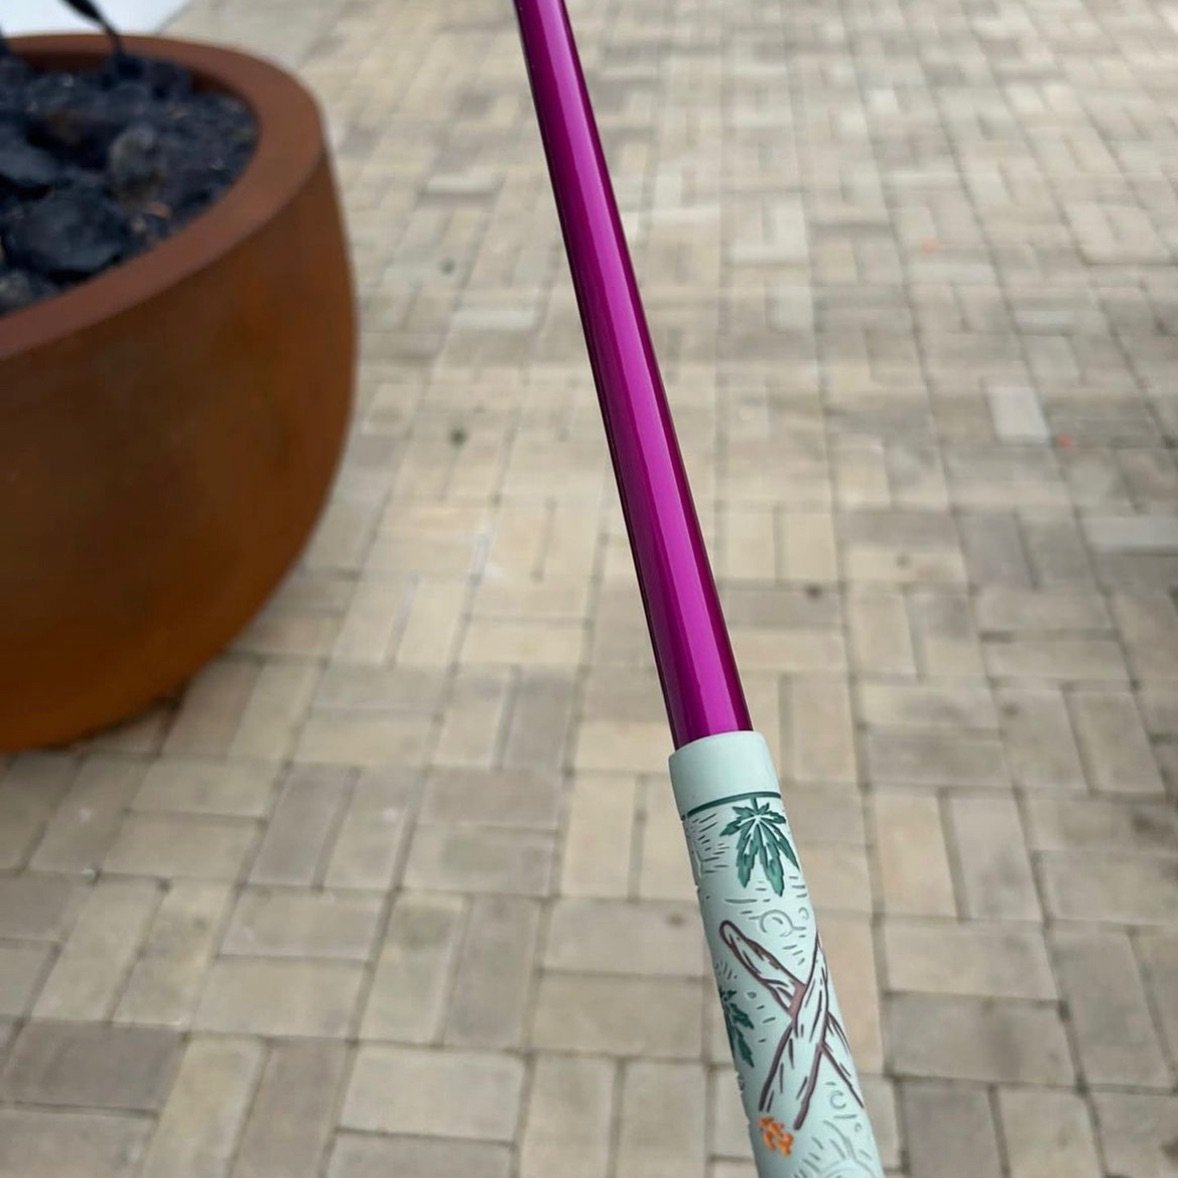 🃏 

Match made in Gotham heaven.

Looking back on some of the slickest custom combo&rsquo;s we&rsquo;ve done. This @taylormadegolf wood shaft is wrapped in Fierce Fuchsia @bombgolf_store, with the @ripitgrips Mary Jane. 

Club owner: @harryjwclement